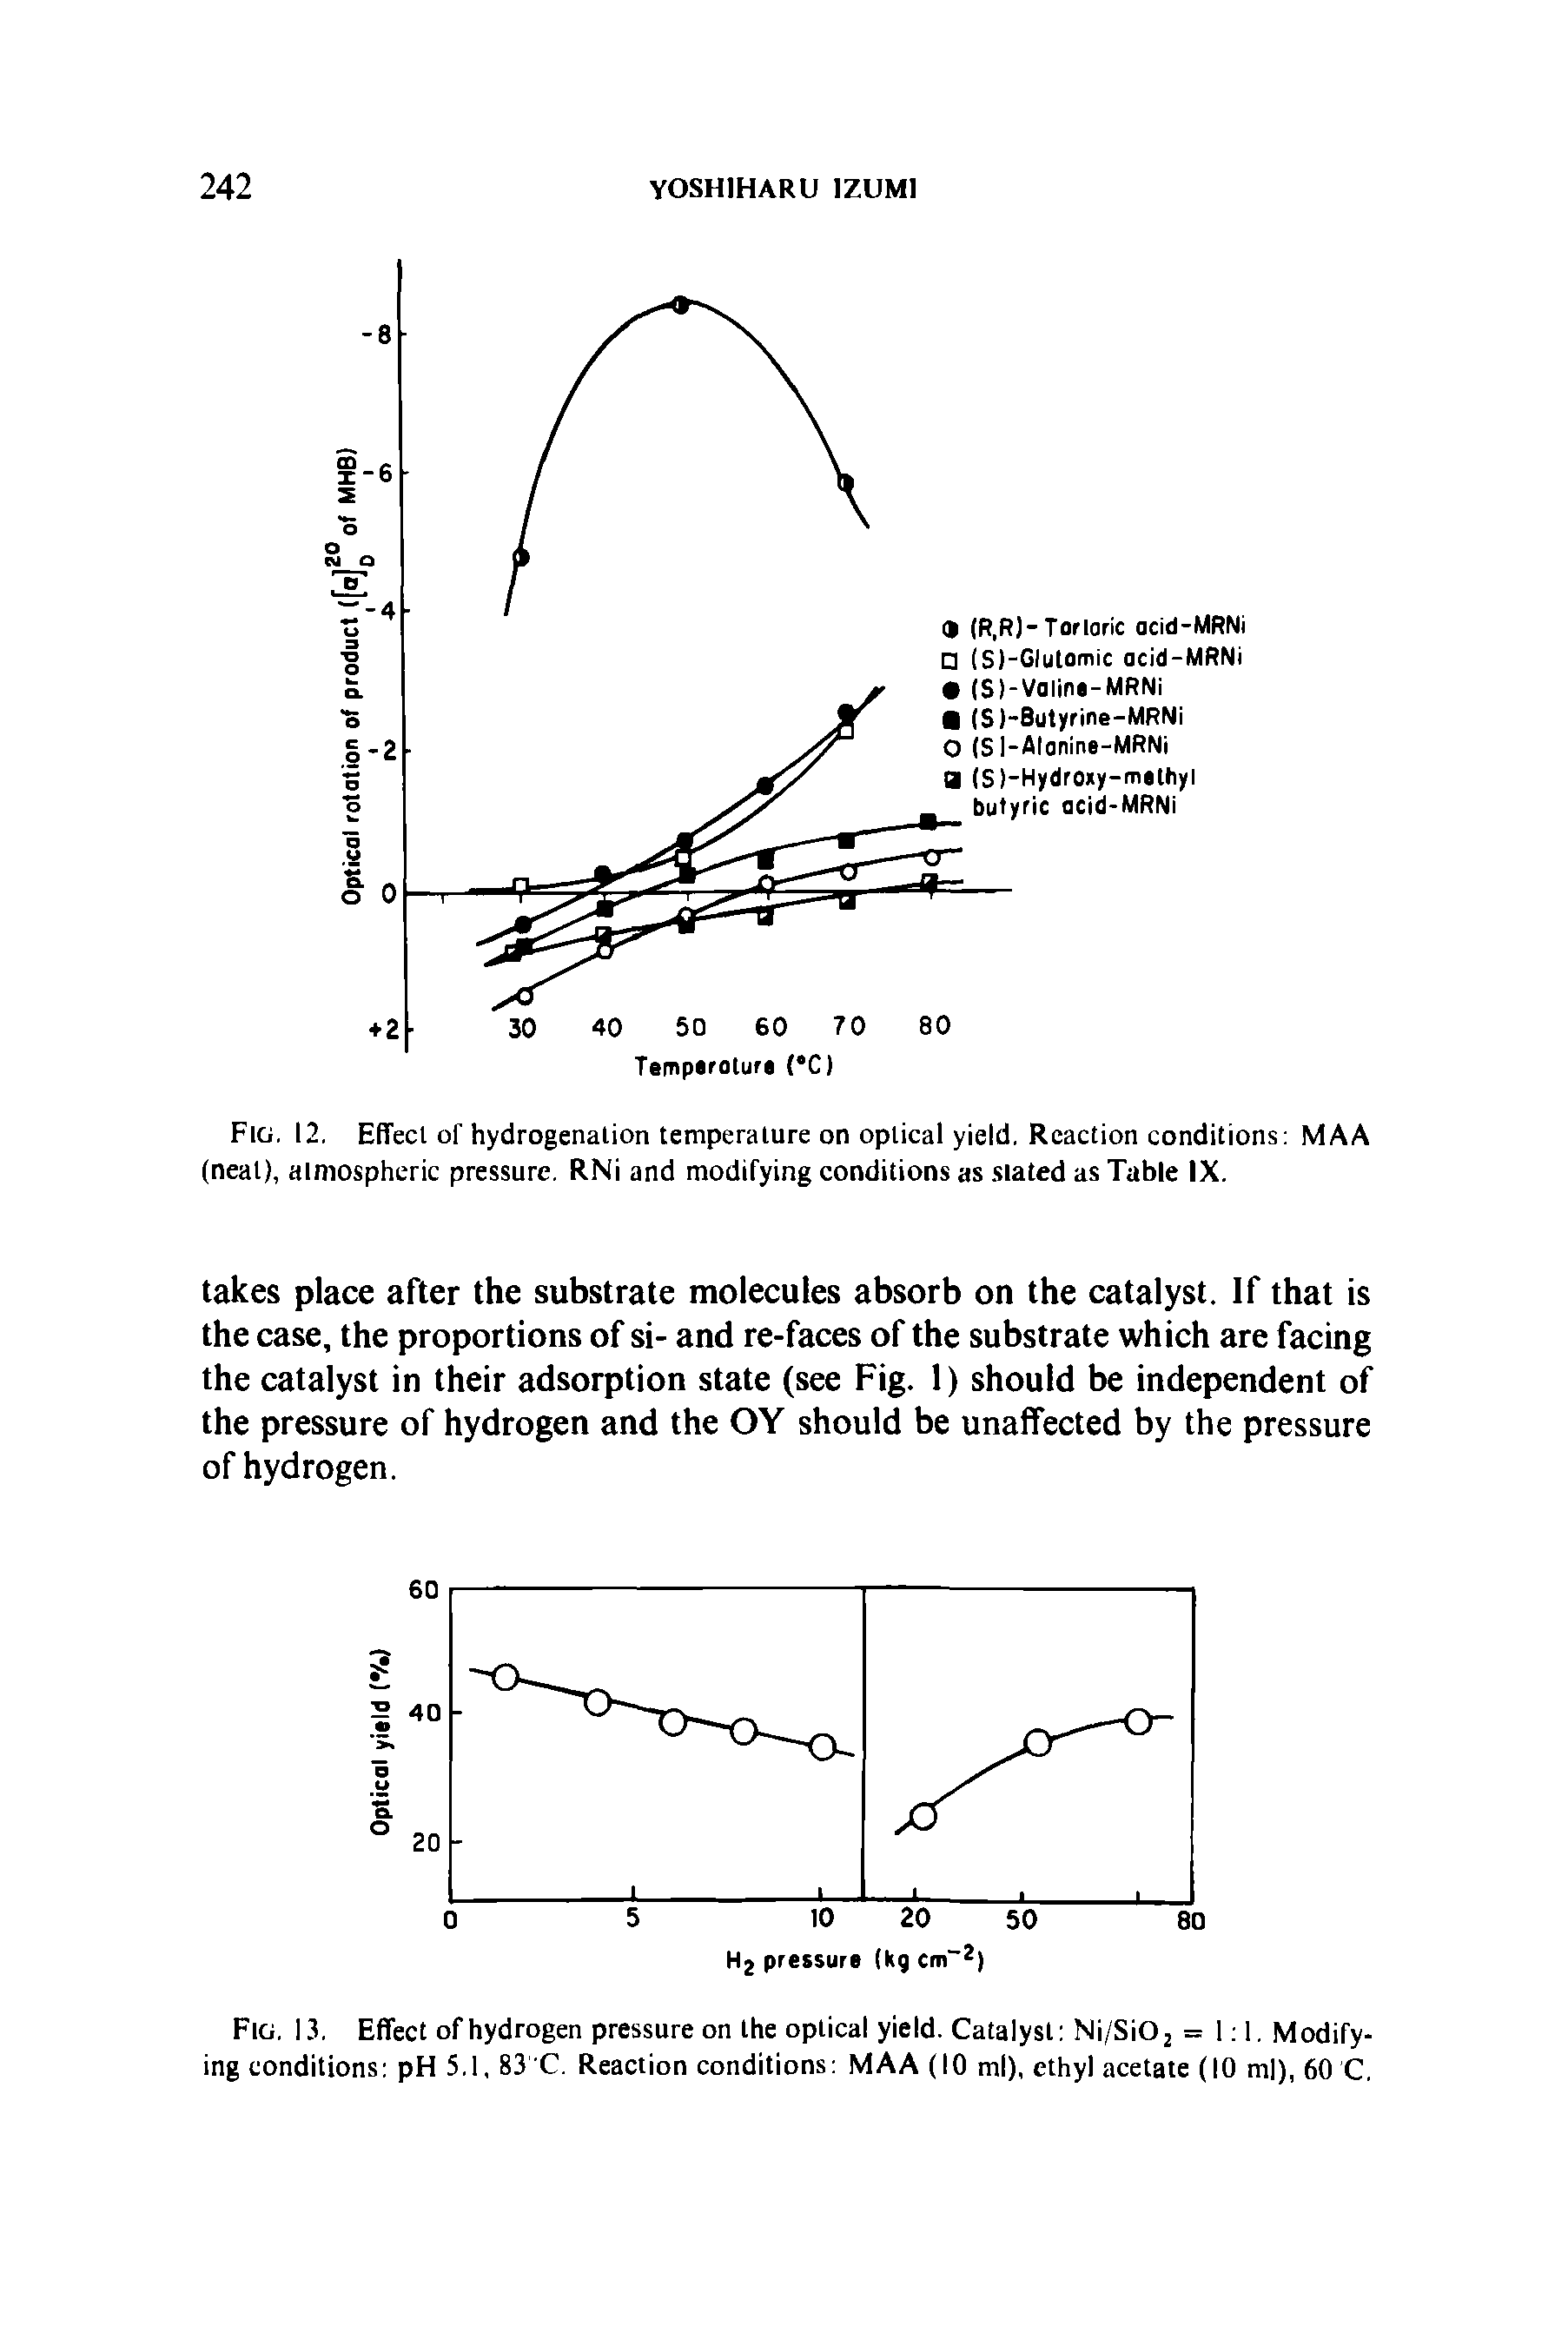 Fig. 12. Effect of hydrogenalion temperalure on optical yield. Reaction conditions MAA (neat), atmospheric pressure. RNi and modifying conditions as slated as Table IX.